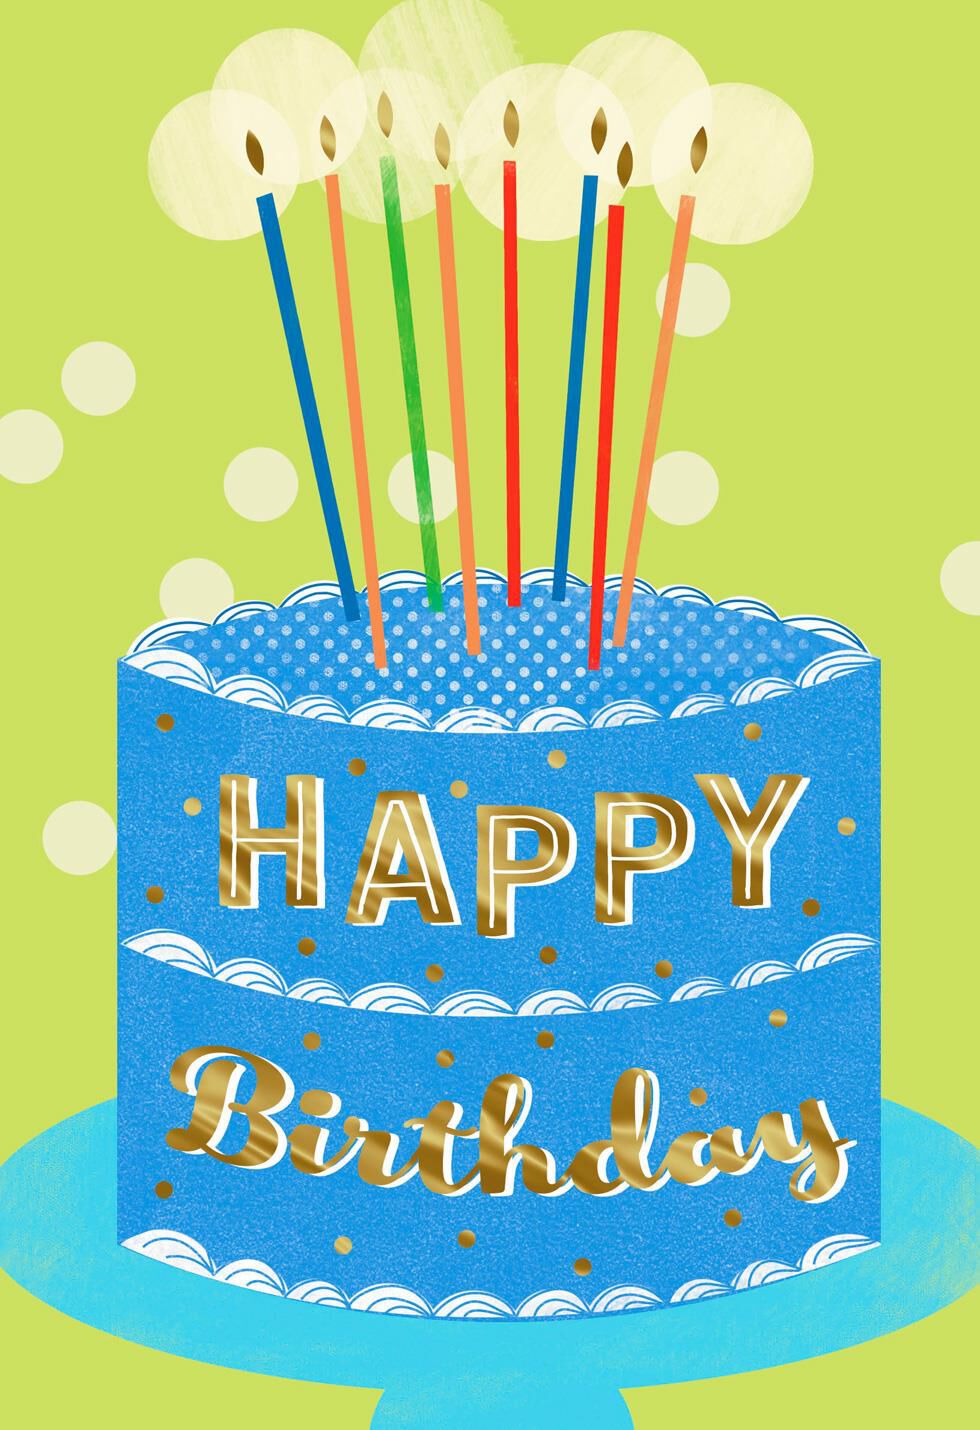 Blue Cake and Candles on Green Birthday Card - Greeting Cards - Hallmark